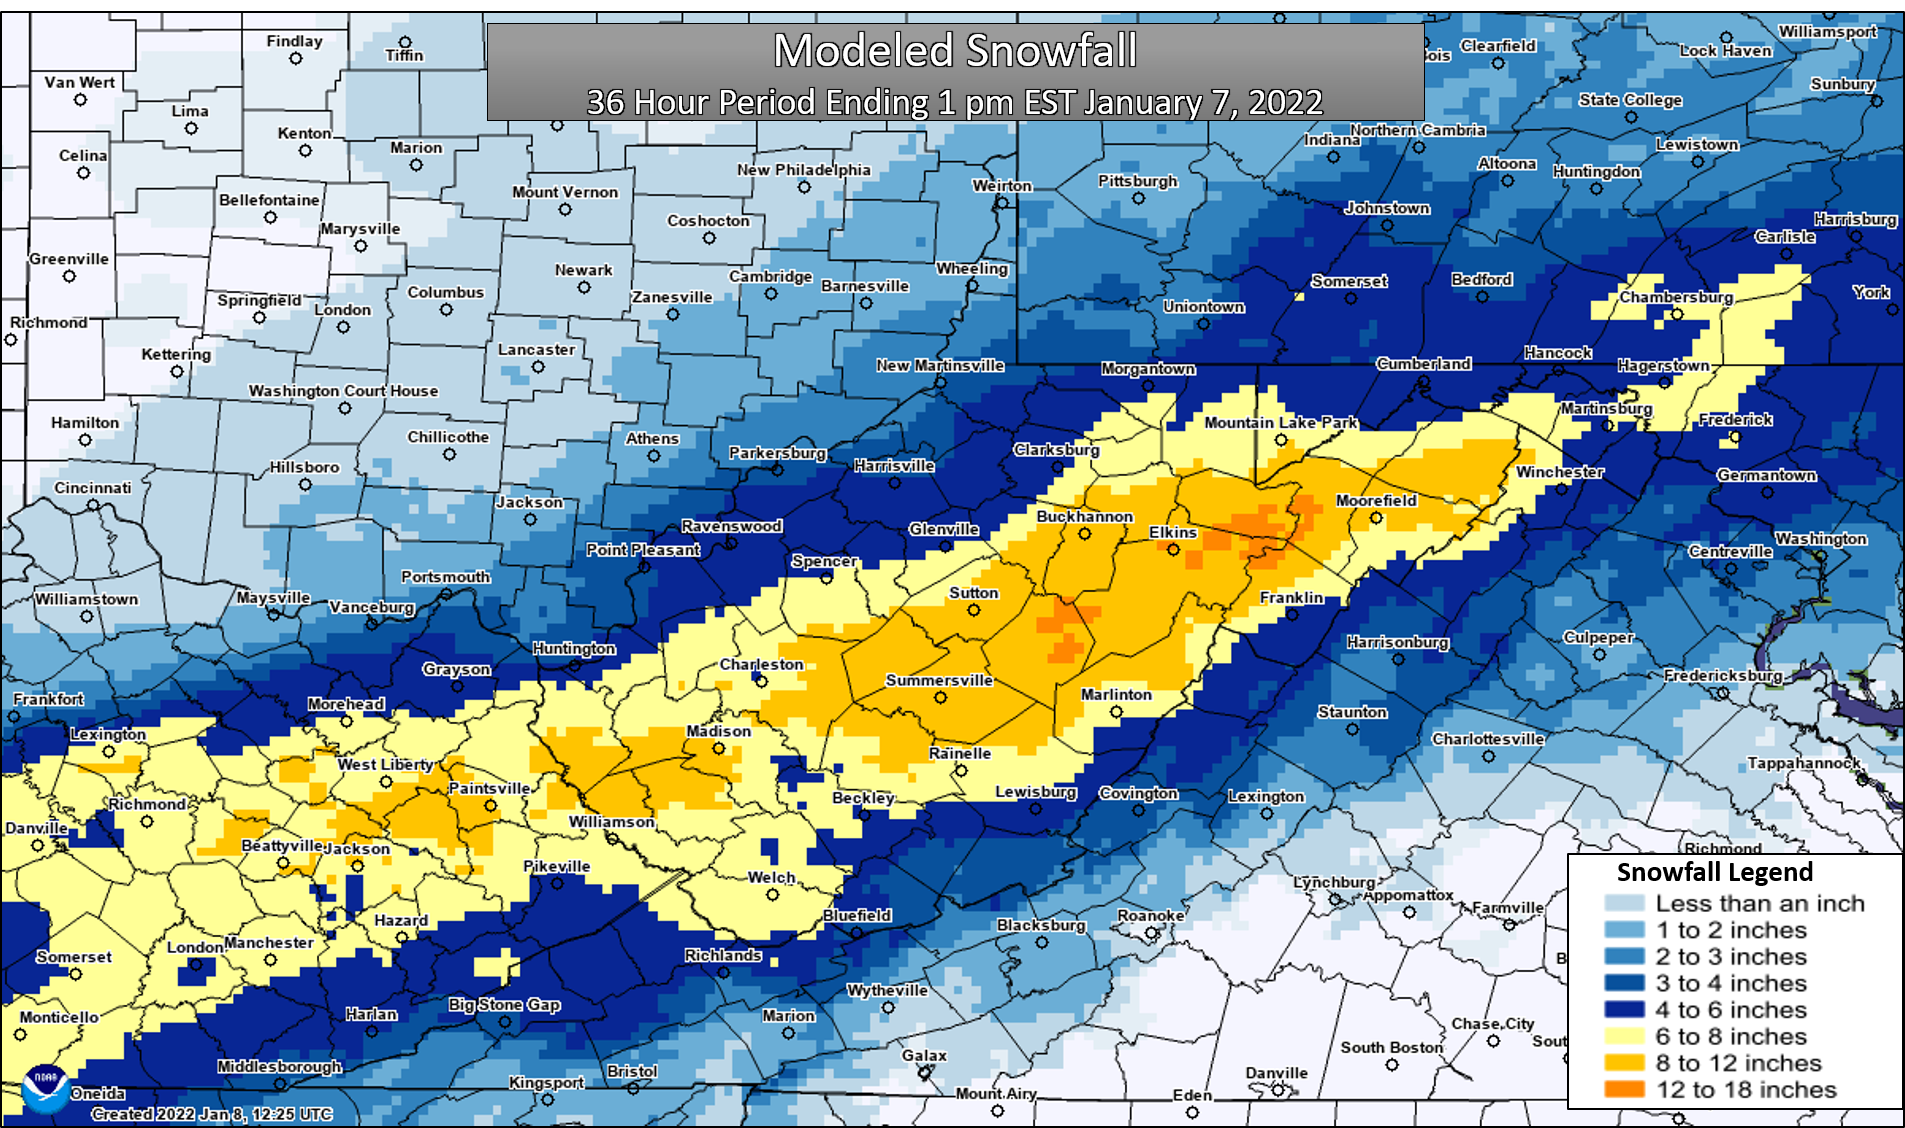 Snowfall summary for 36 hour period ending 1 pm EST Friday January 7, 2022